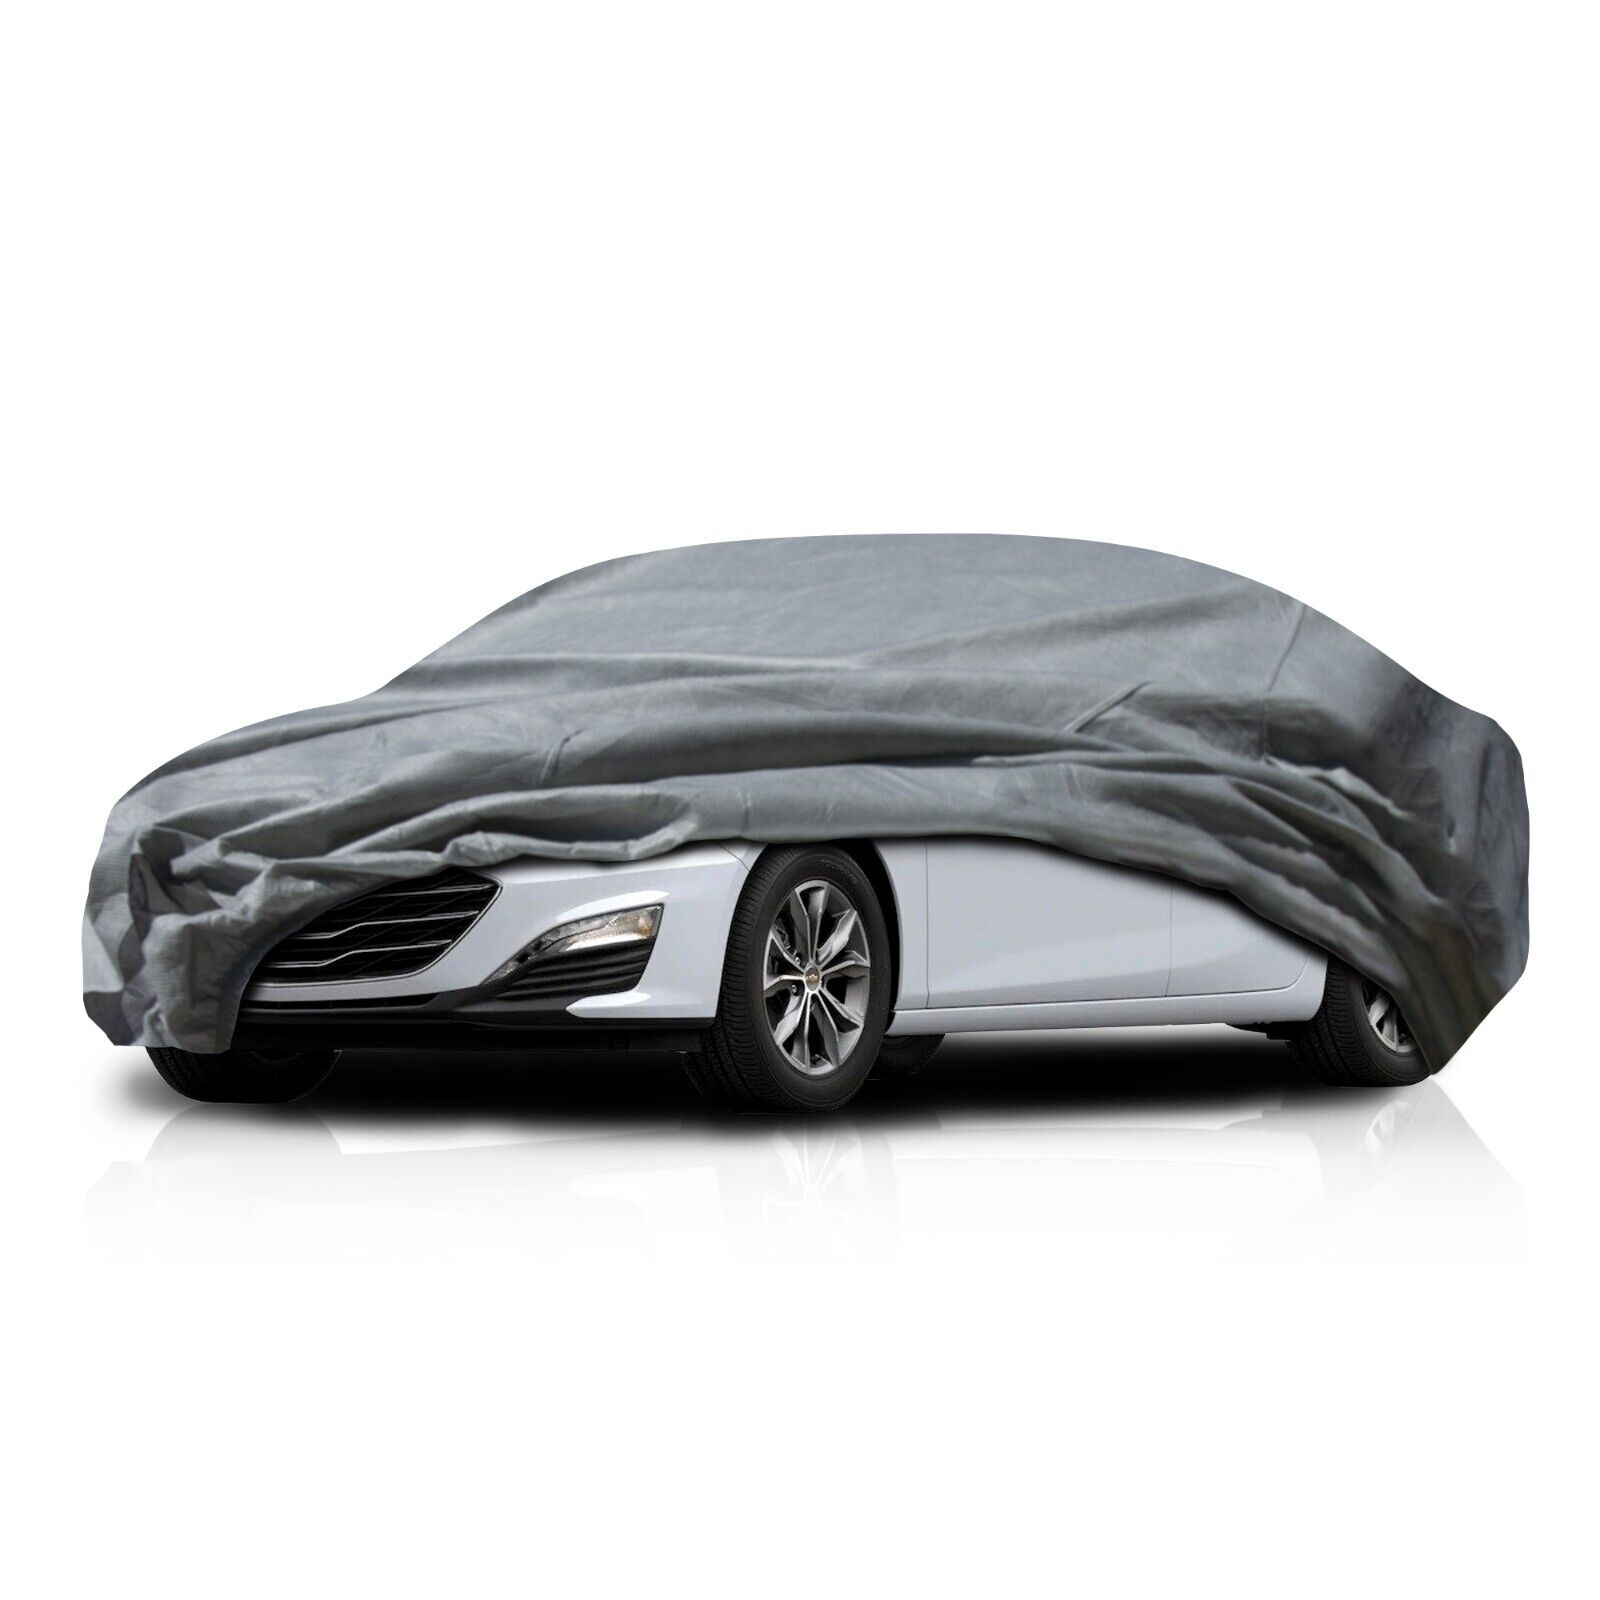 WeatherTec UHD 5 Layer Water Resistant Car Cover for 1984-1996 Nissan 300ZX 2+0